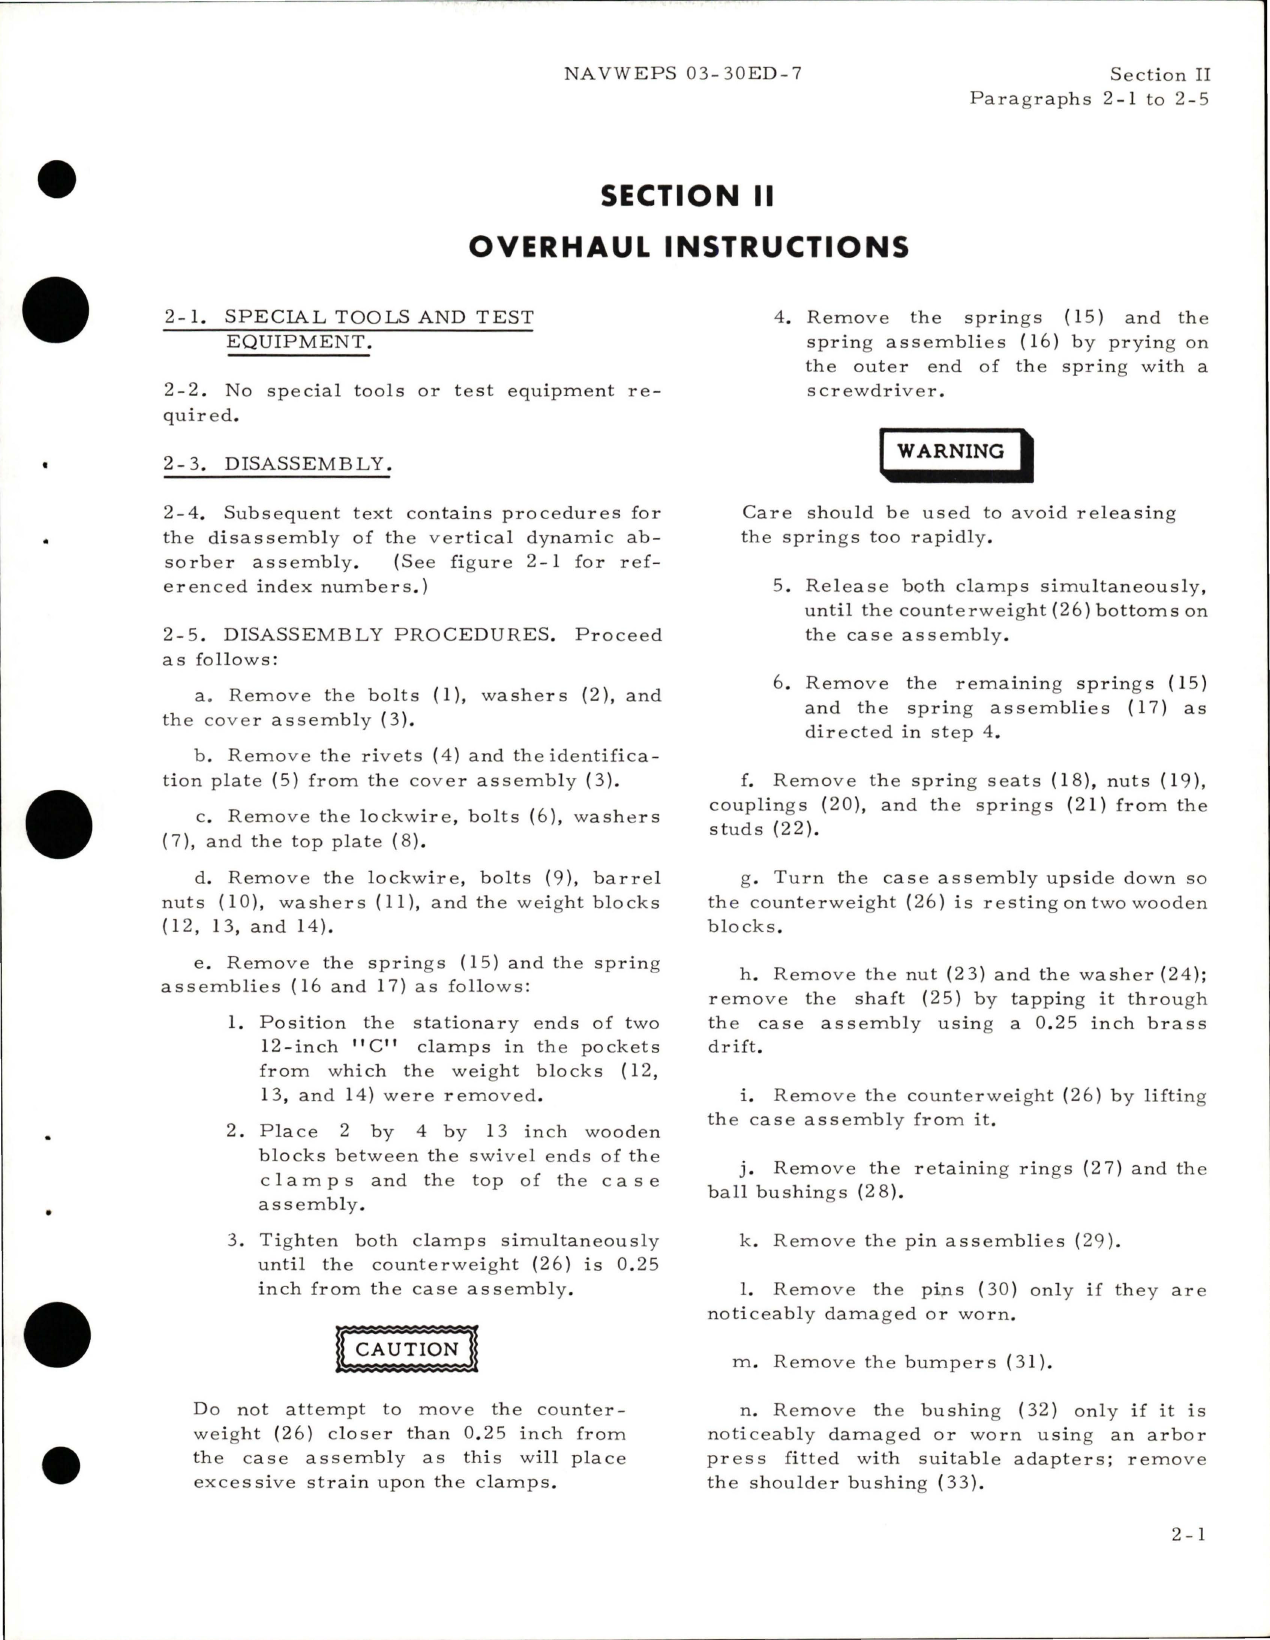 Sample page 7 from AirCorps Library document: Overhaul Instructions for Vertical Dynamic Absorber Assembly - Part A02S7124-7, A02S7124-9